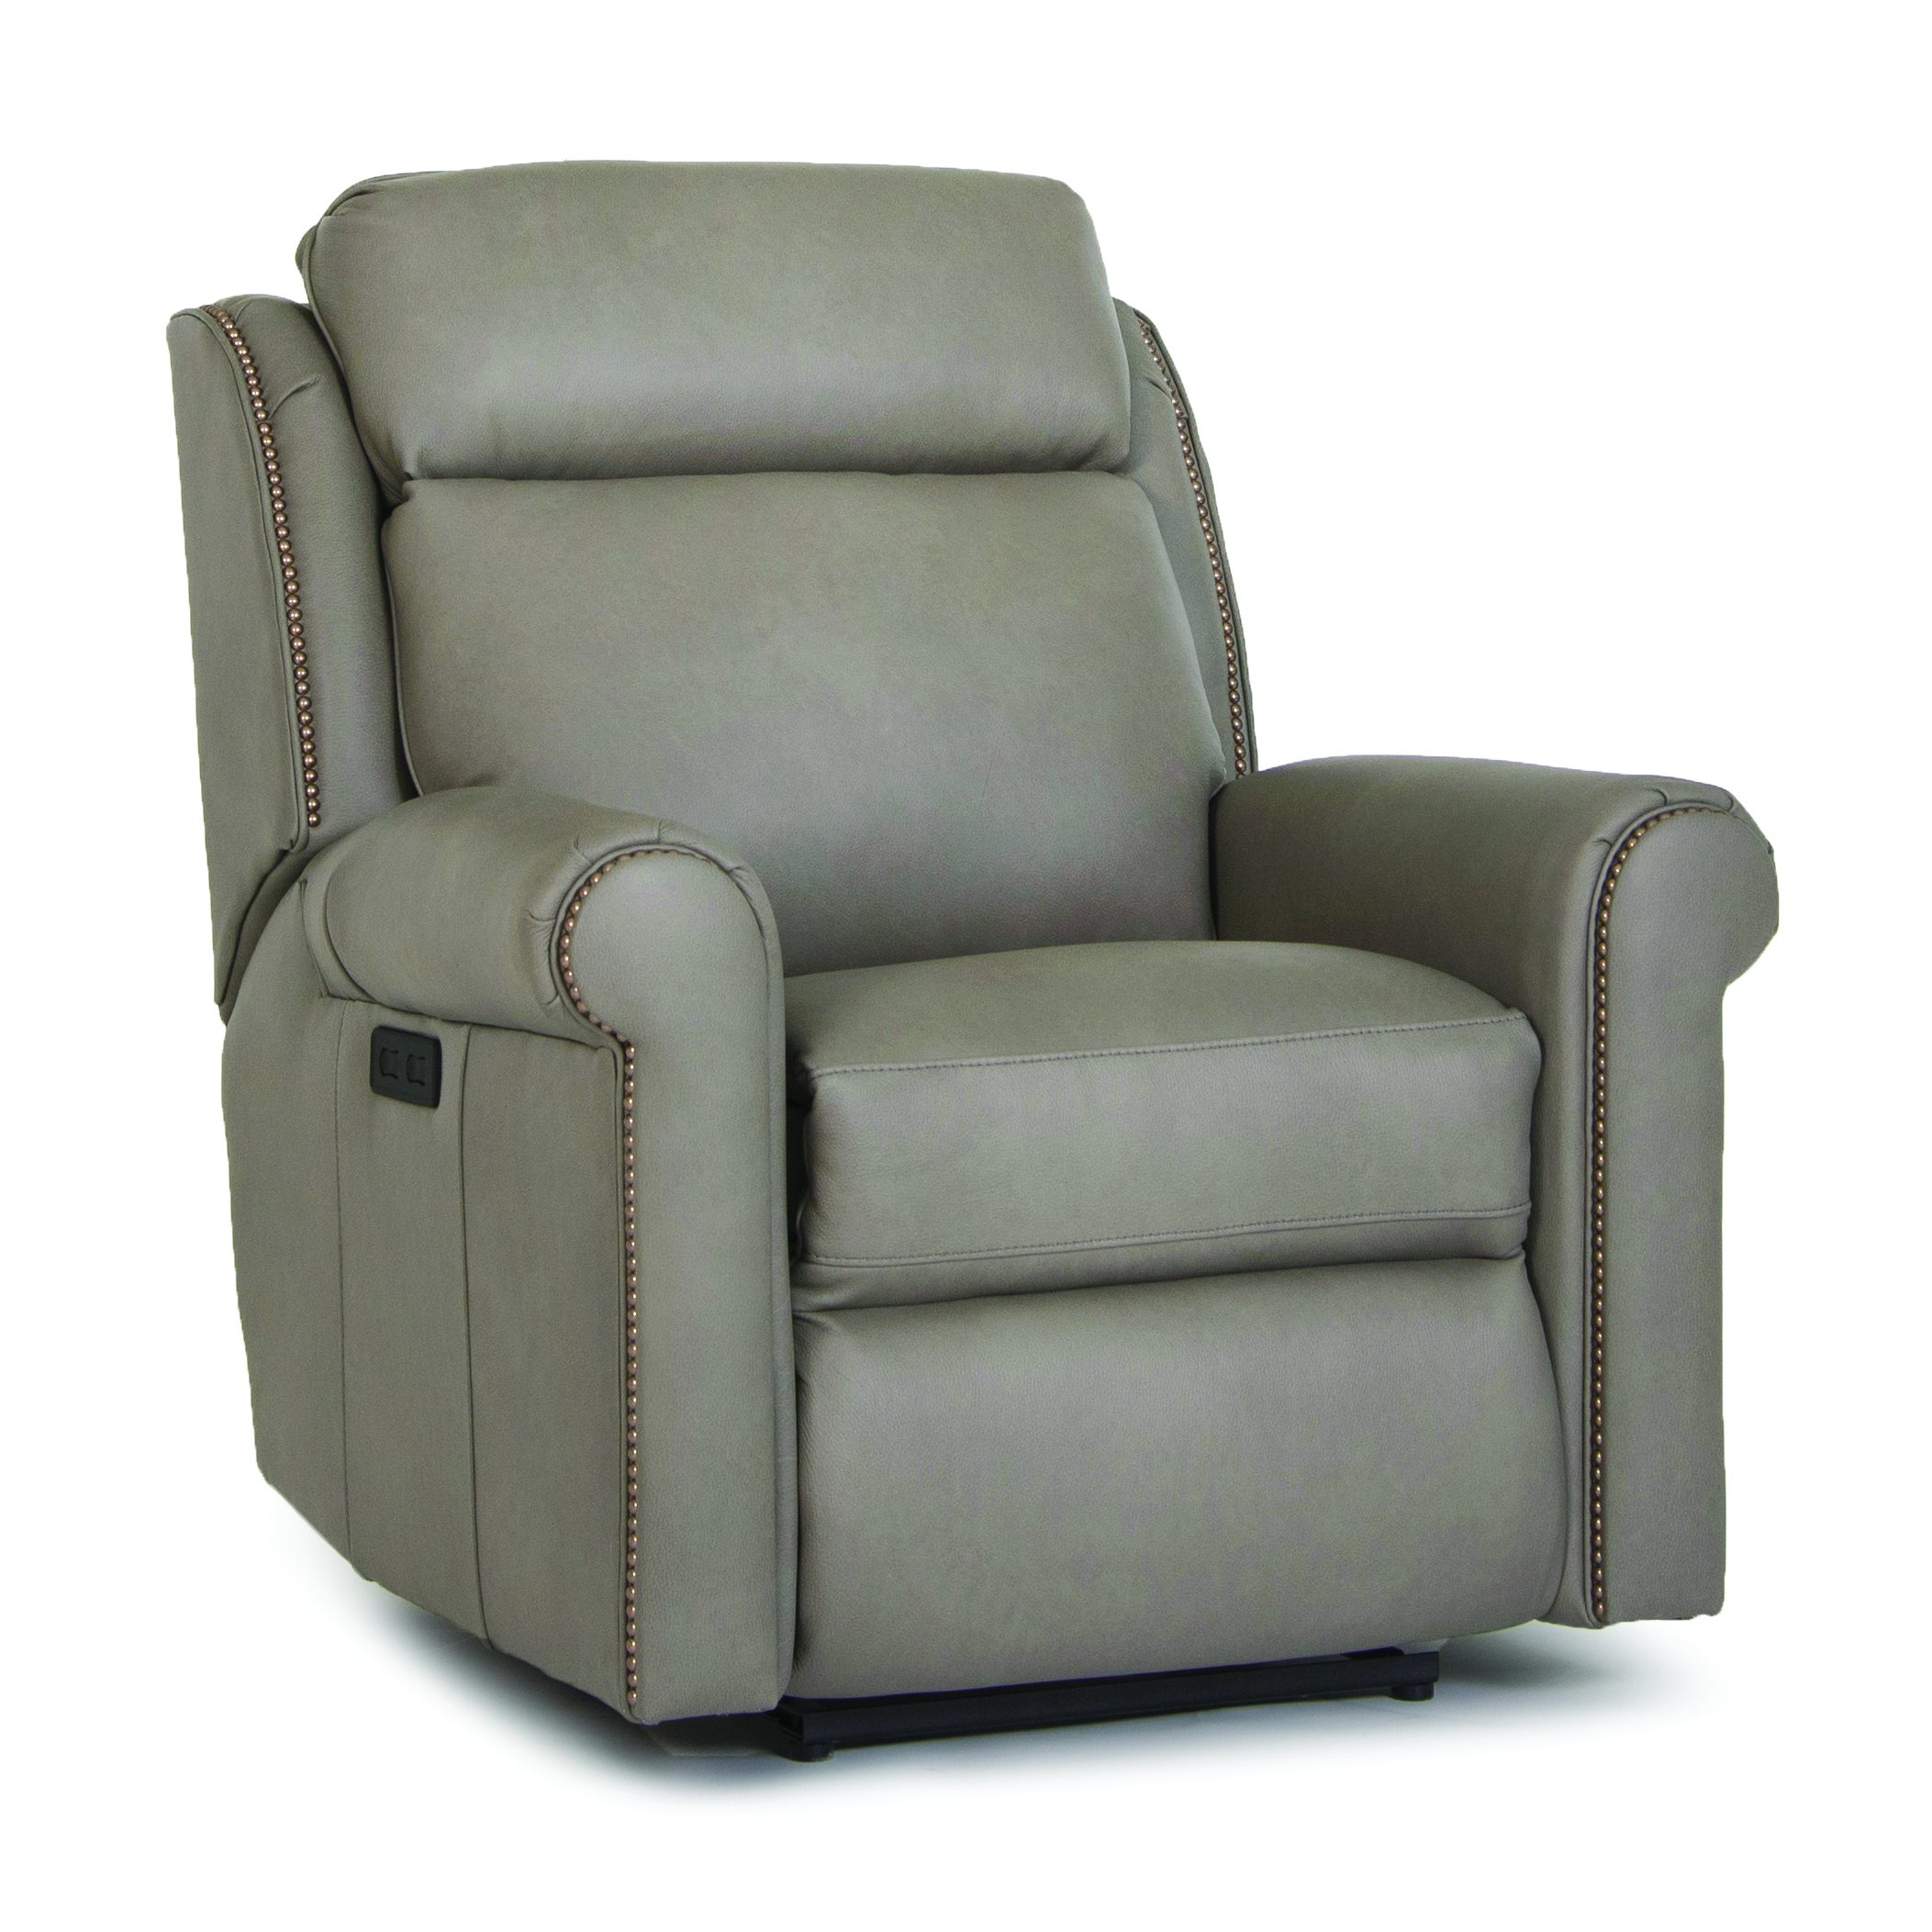 422-F-leather-motorized-recliner